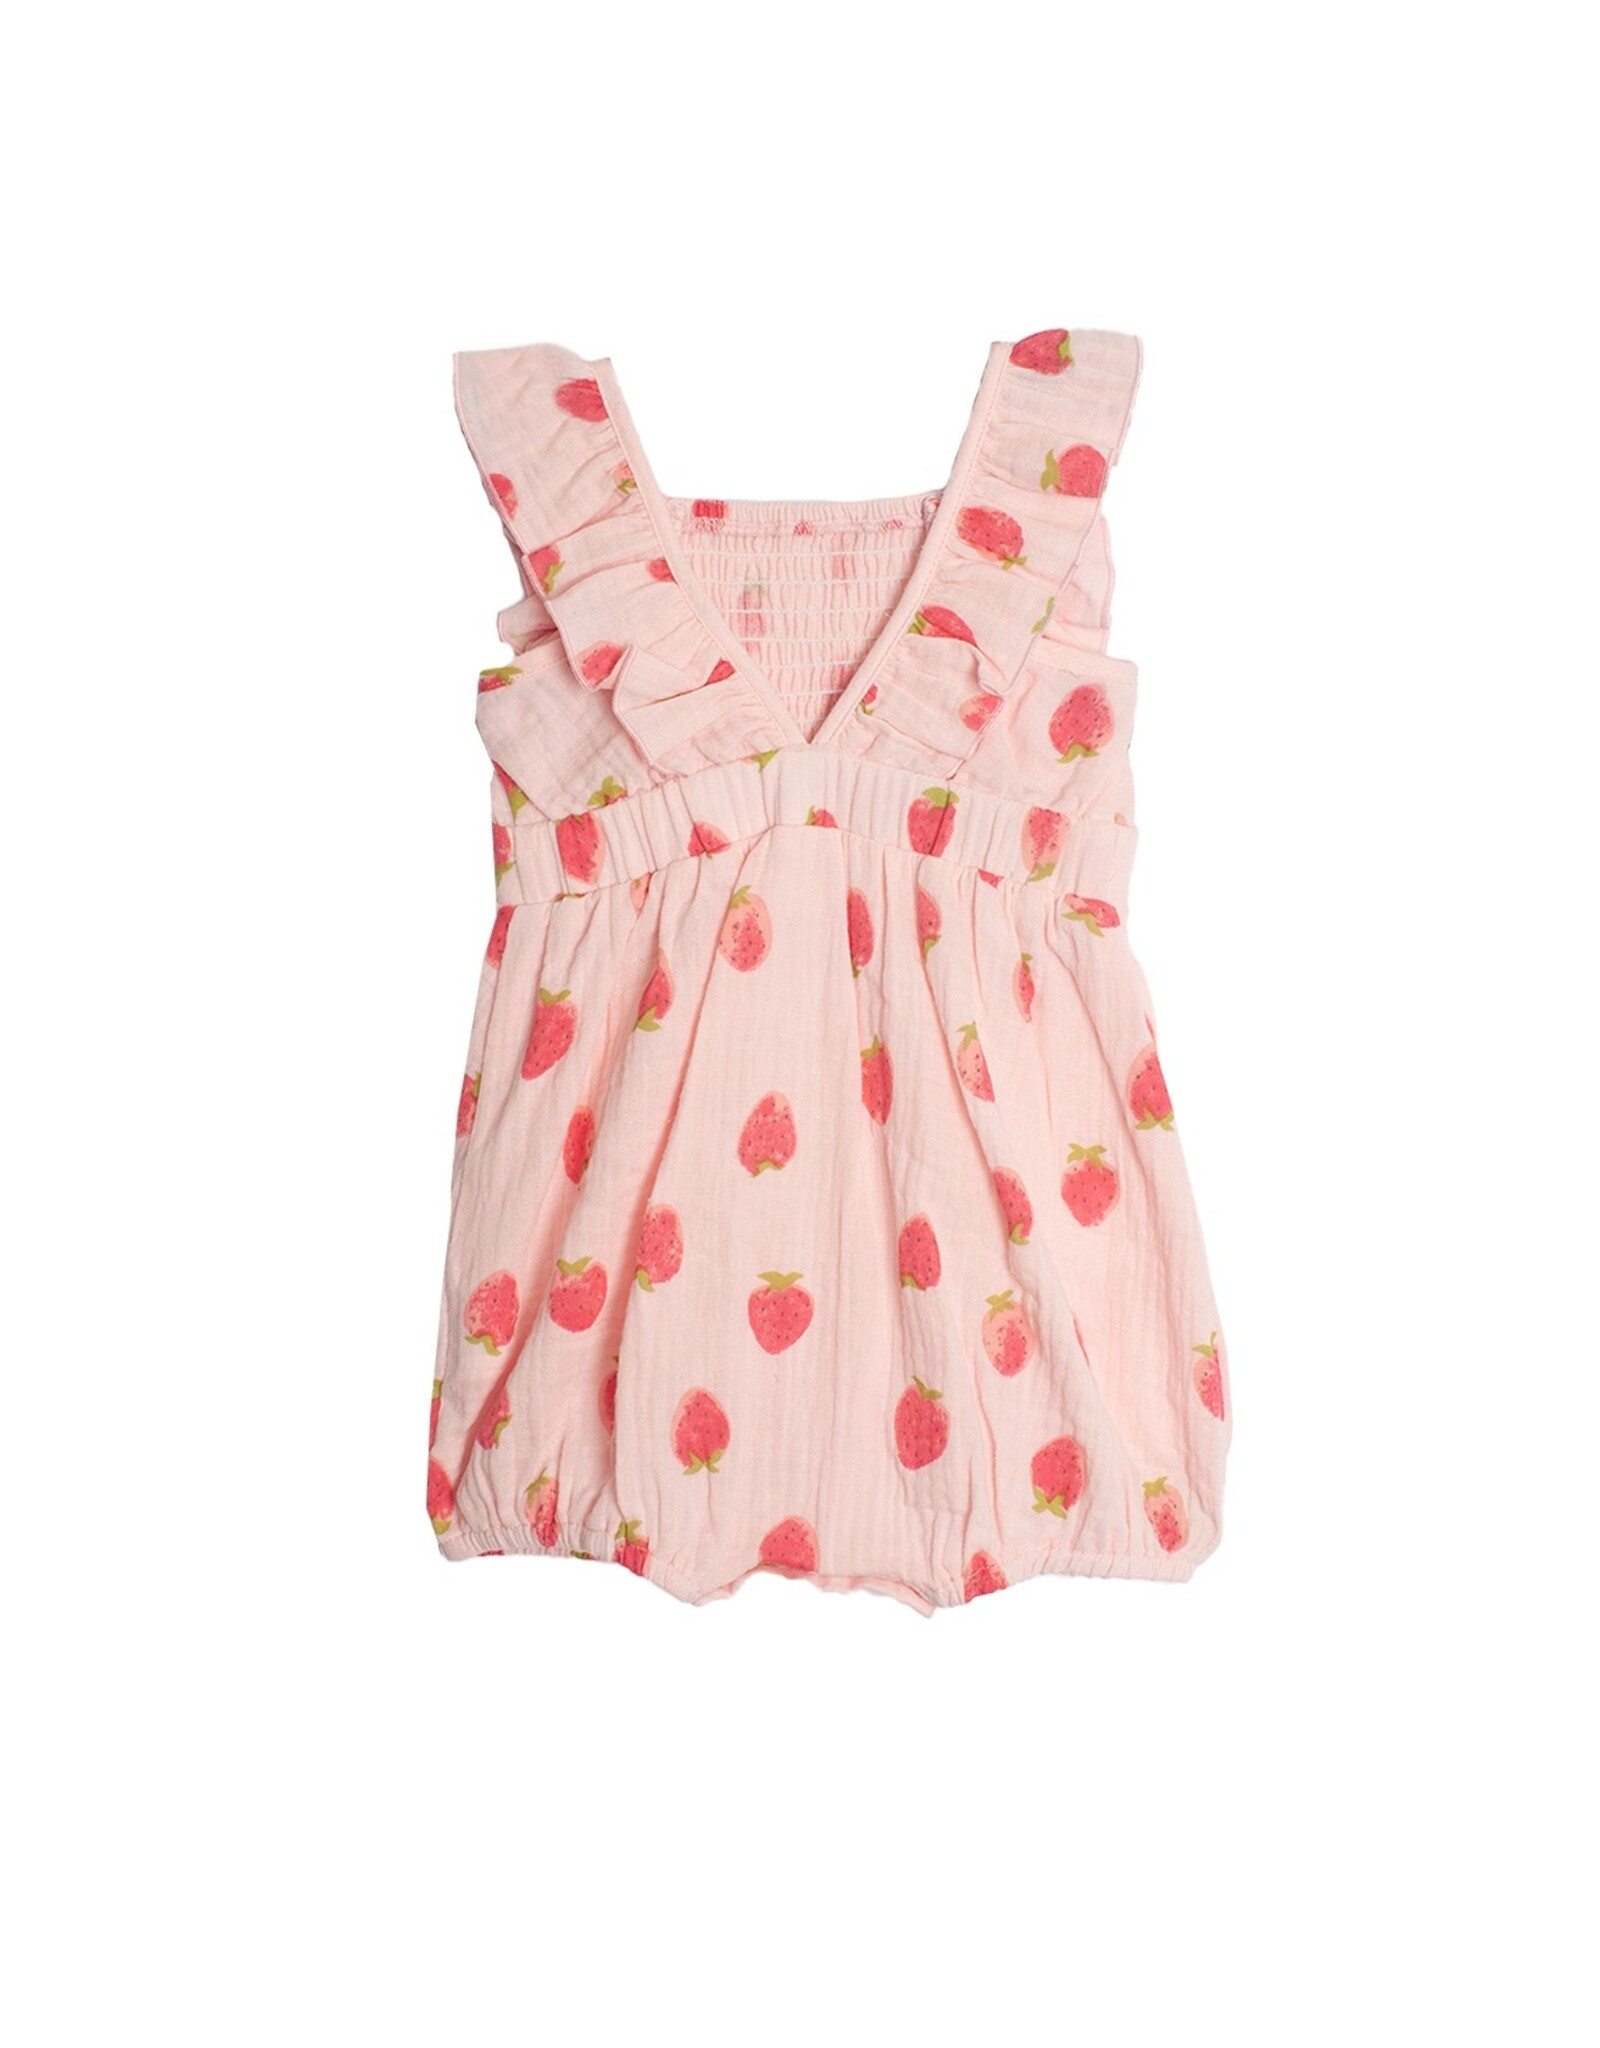 Mabel and Honey Berrylicious Romper